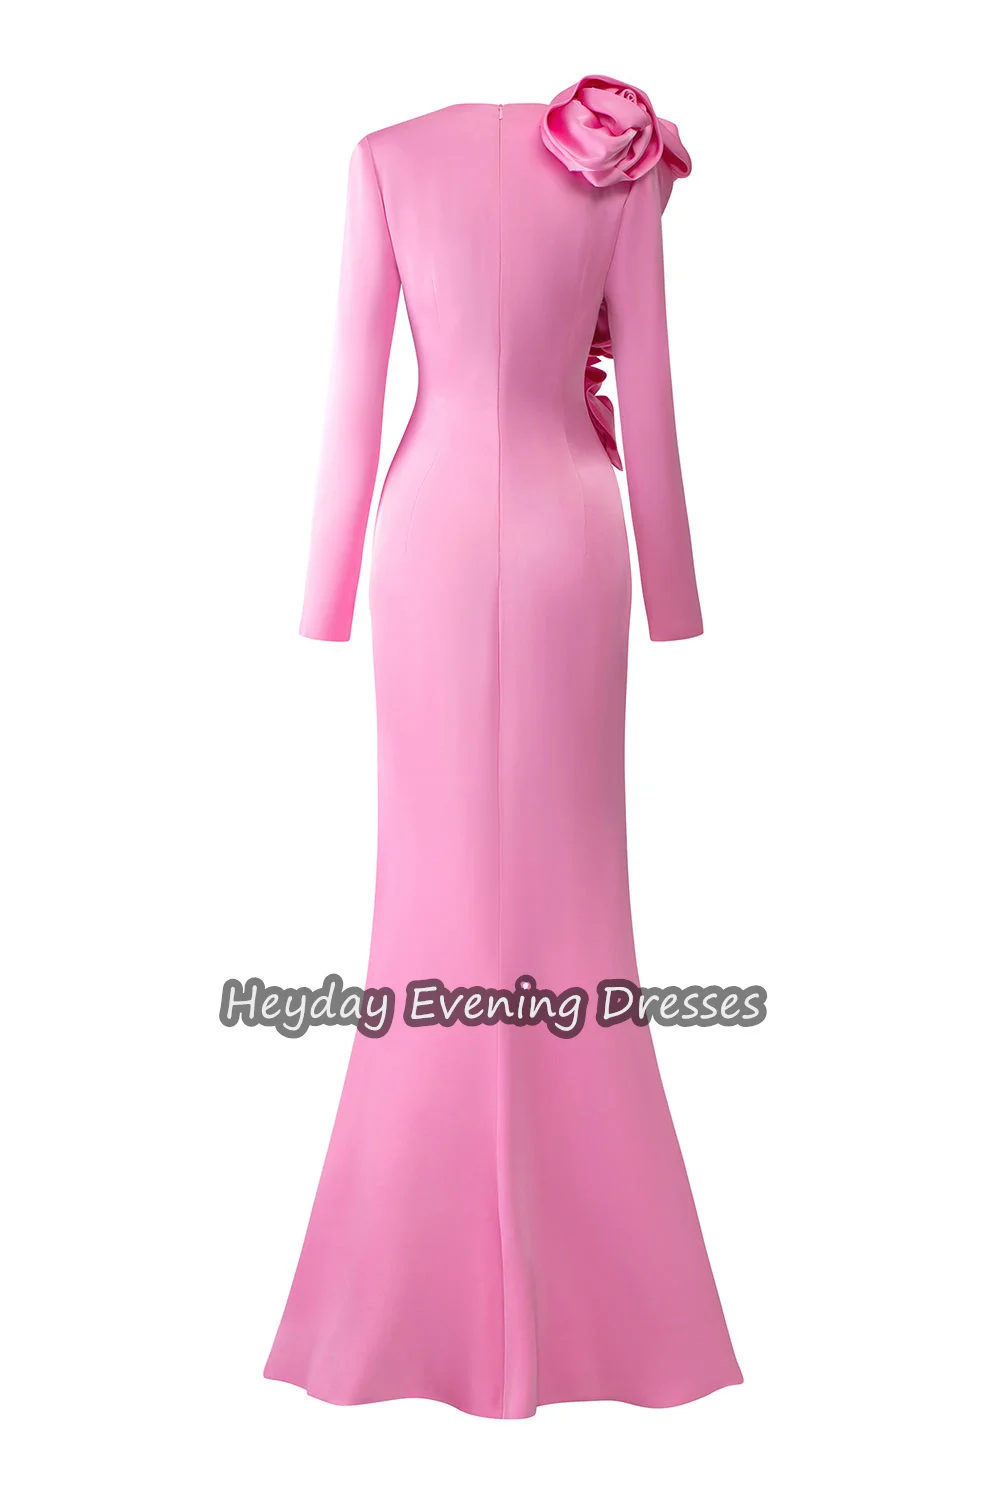 Heyday Crepe Straight O-neck Empire Saudi Simple Prom Gown Flowers Floor Length Elegant Evening Party Dresses For Women 2024